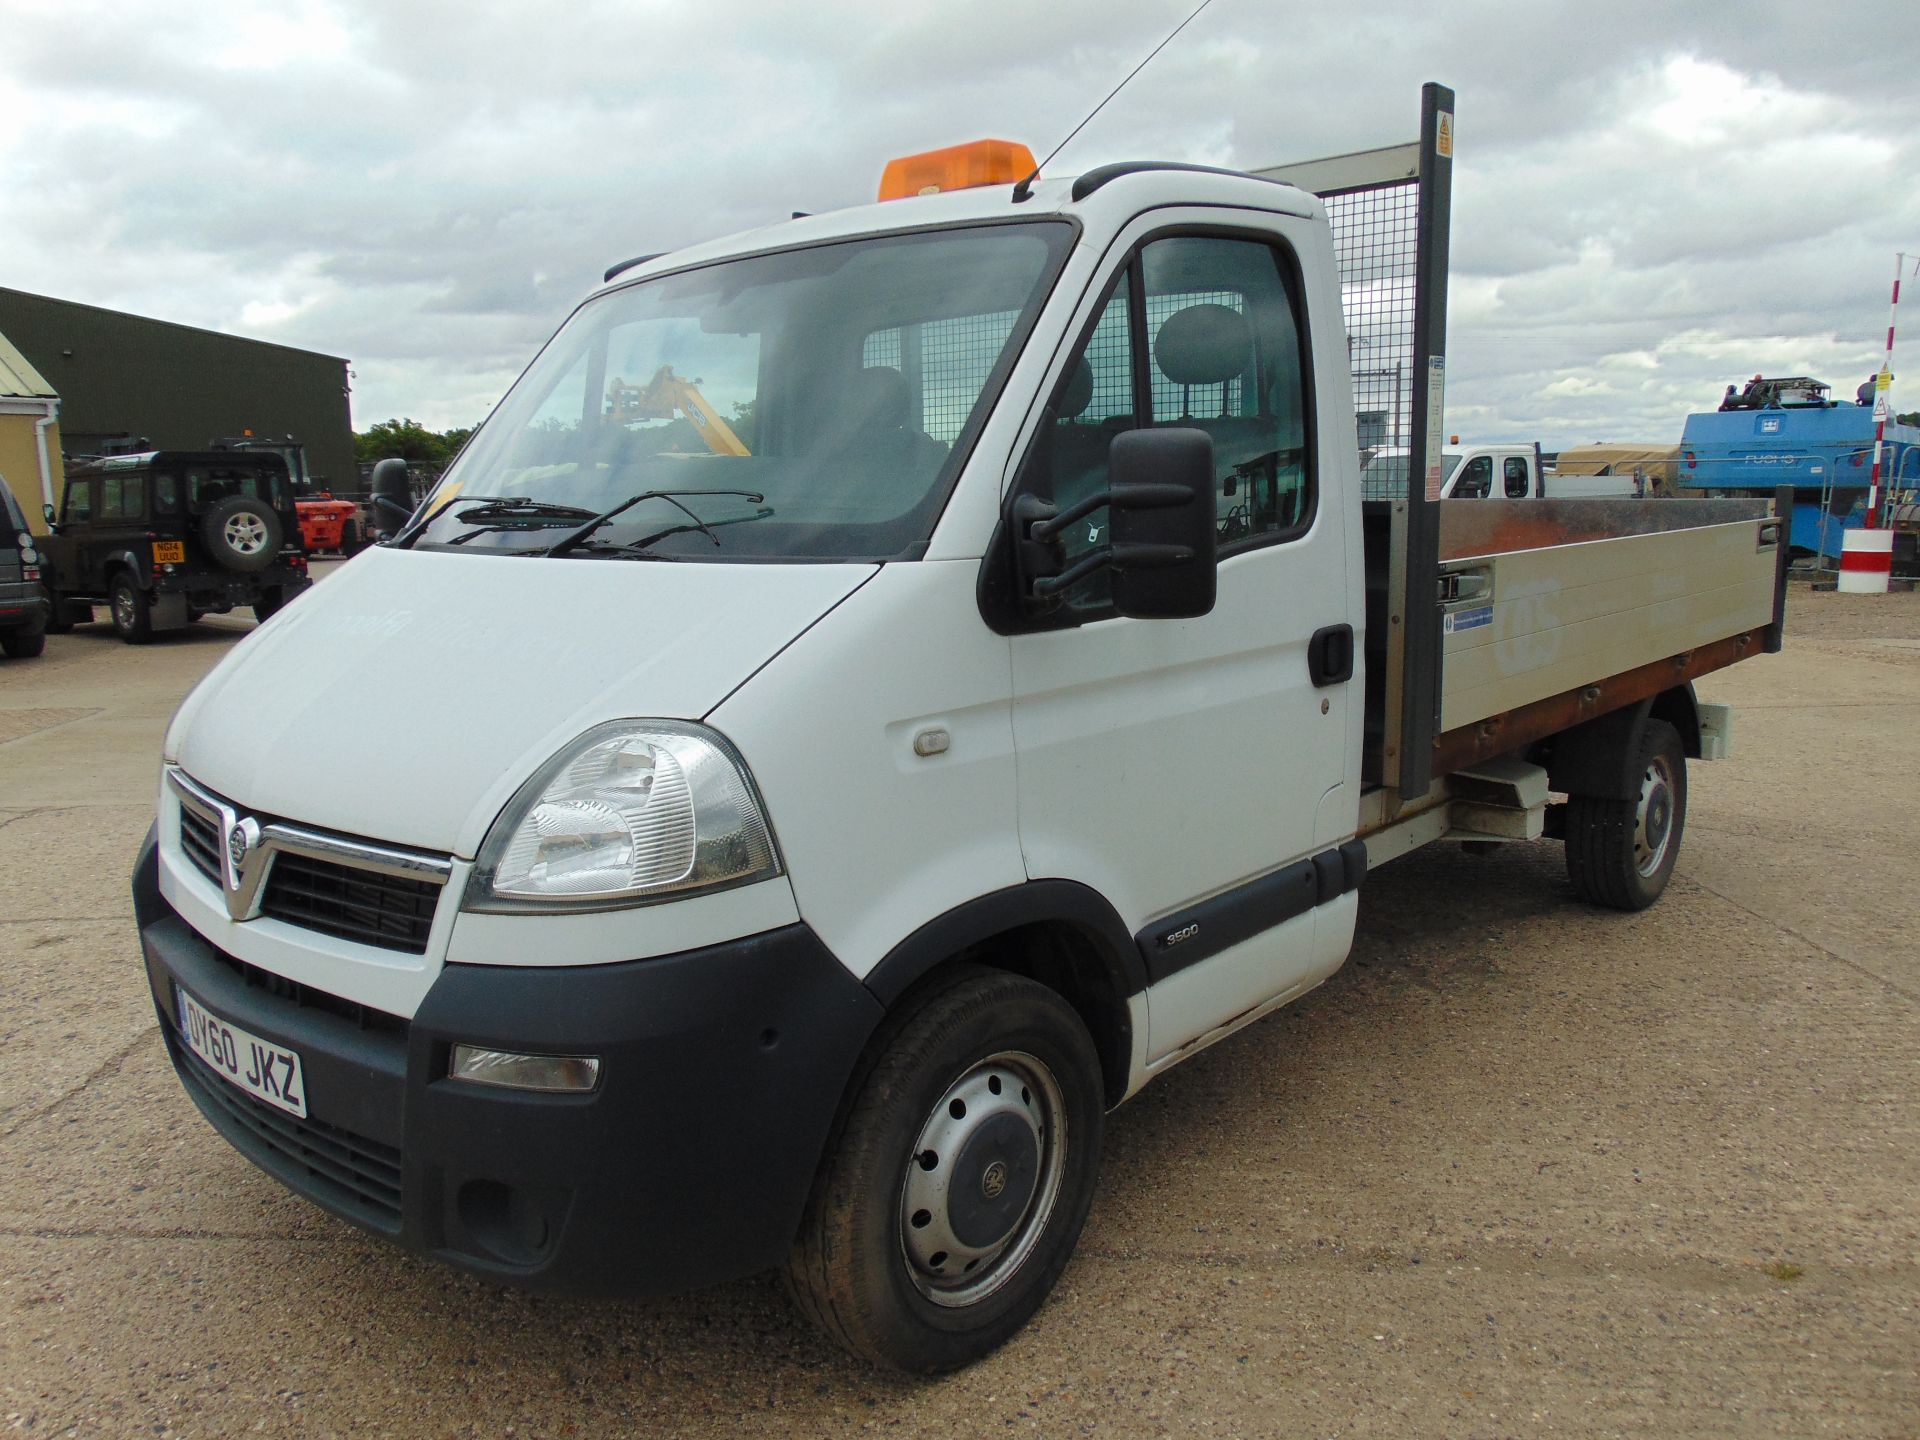 2010 Vauxhall Movano 3500 2.5 CDTi MWB Flat Bed Tipper - Image 3 of 15